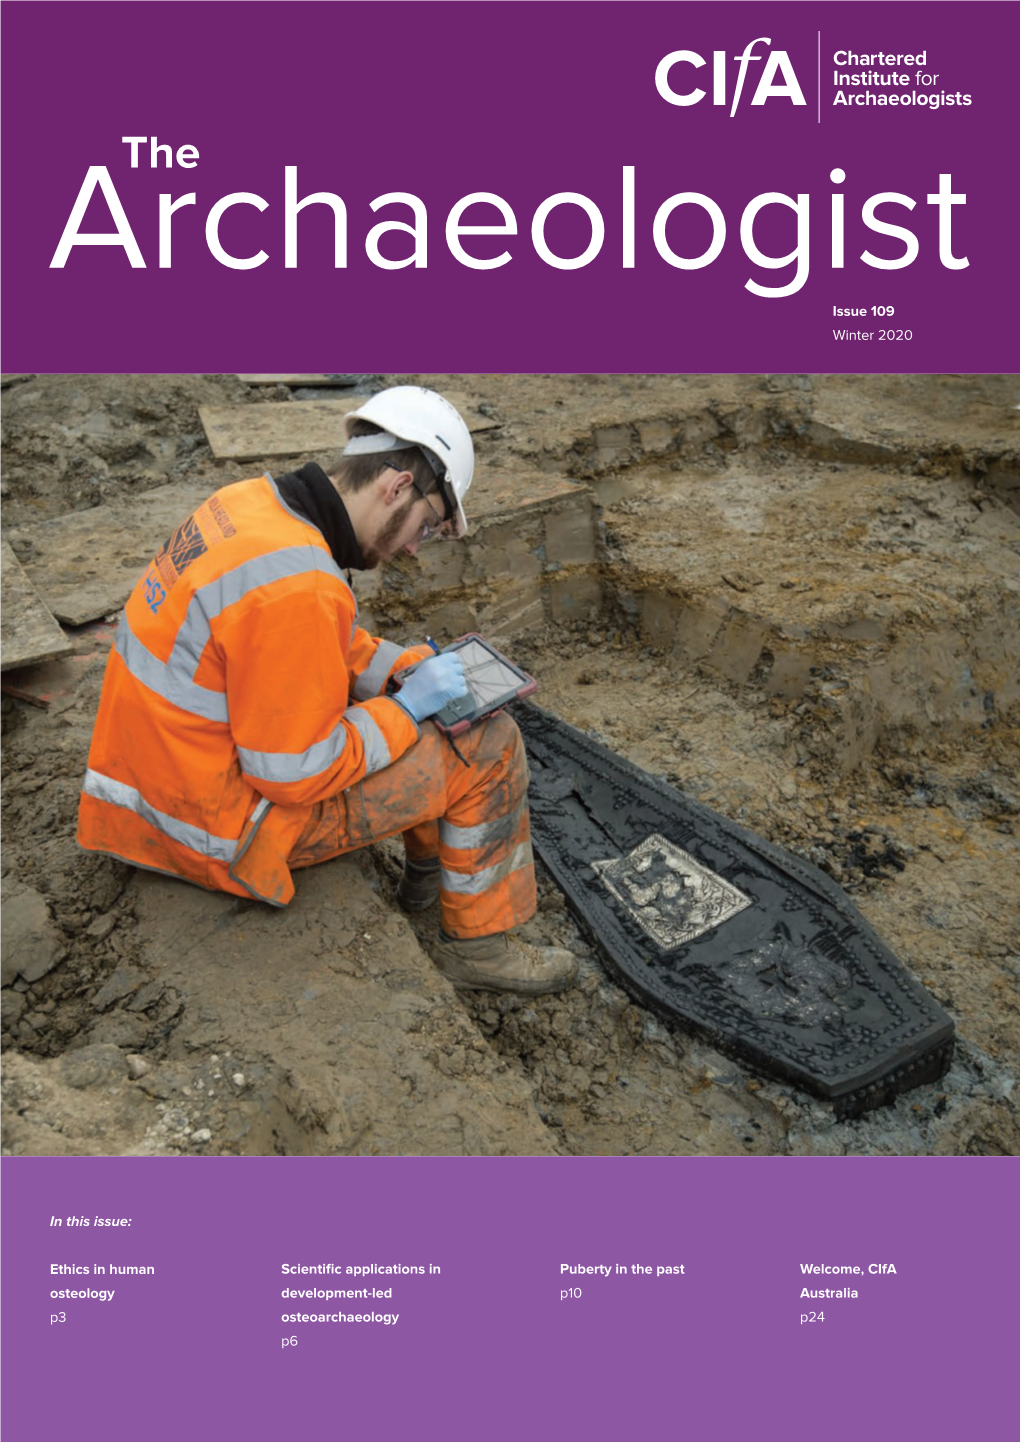 The Archaeologist Issue 109 Winter 2020